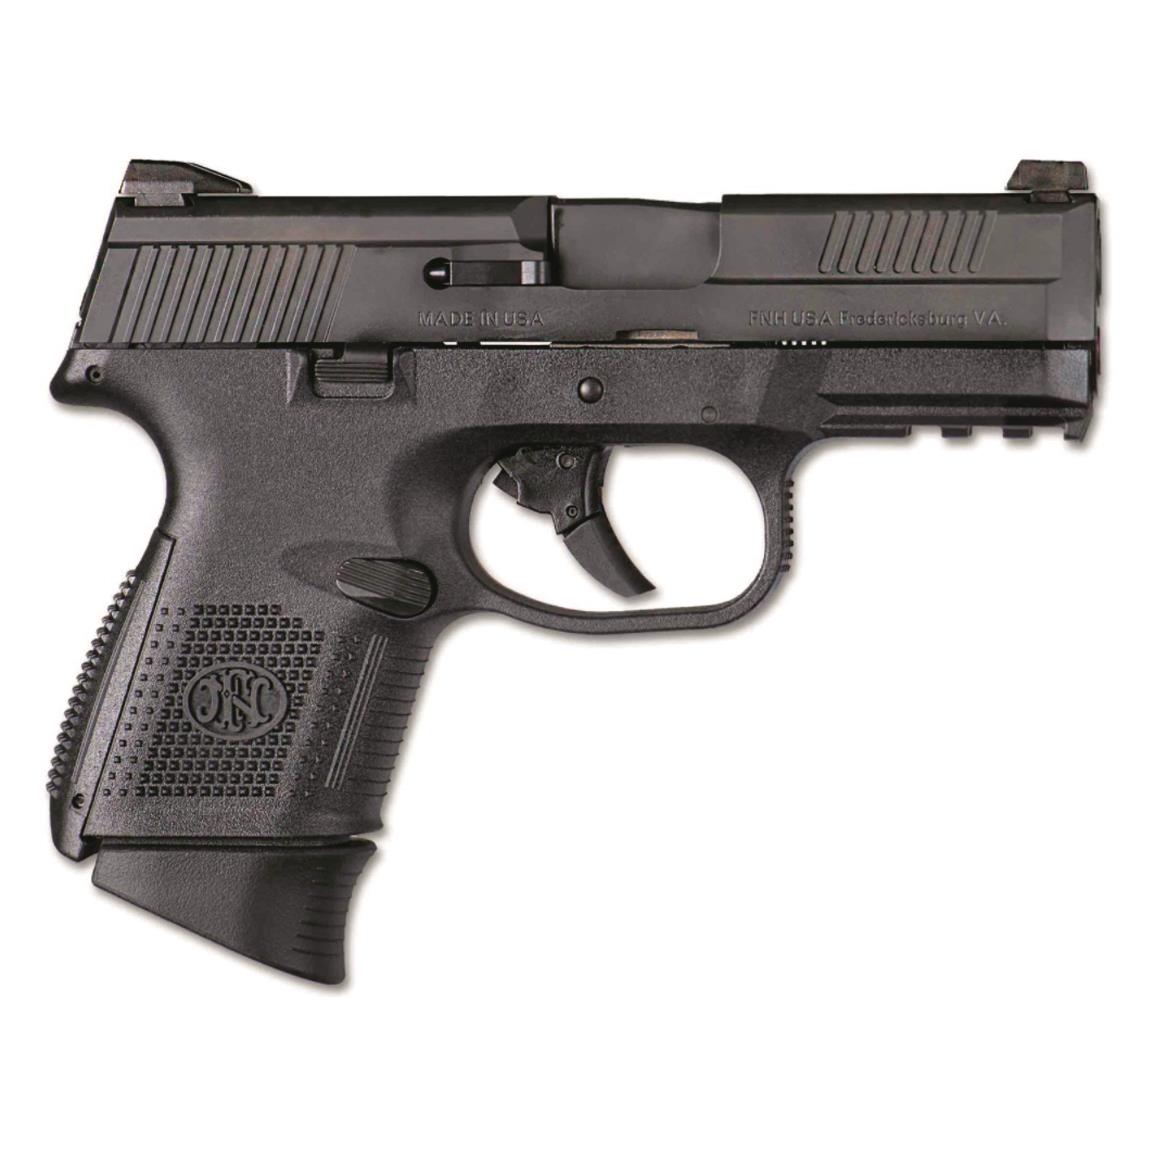 FN America FNS-9 Compact, Semi-Automatic, 9mm, 3.6" Barrel, No Manual Safety, 10+1 Rounds